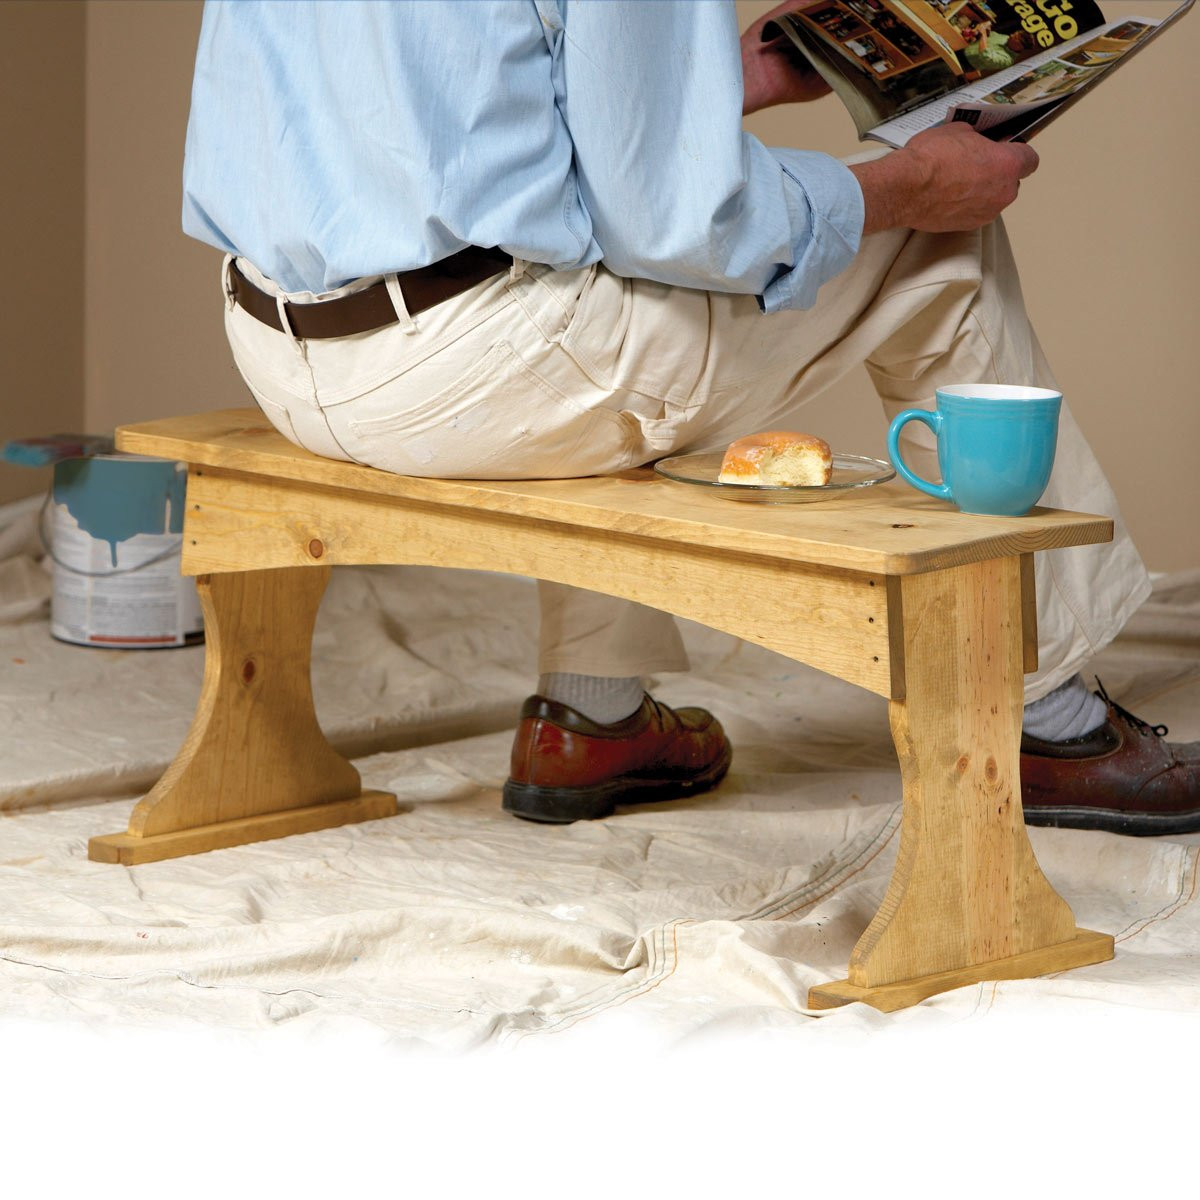 Wood DIY Projects
 The Top 10 DIY Wood Projects — The Family Handyman